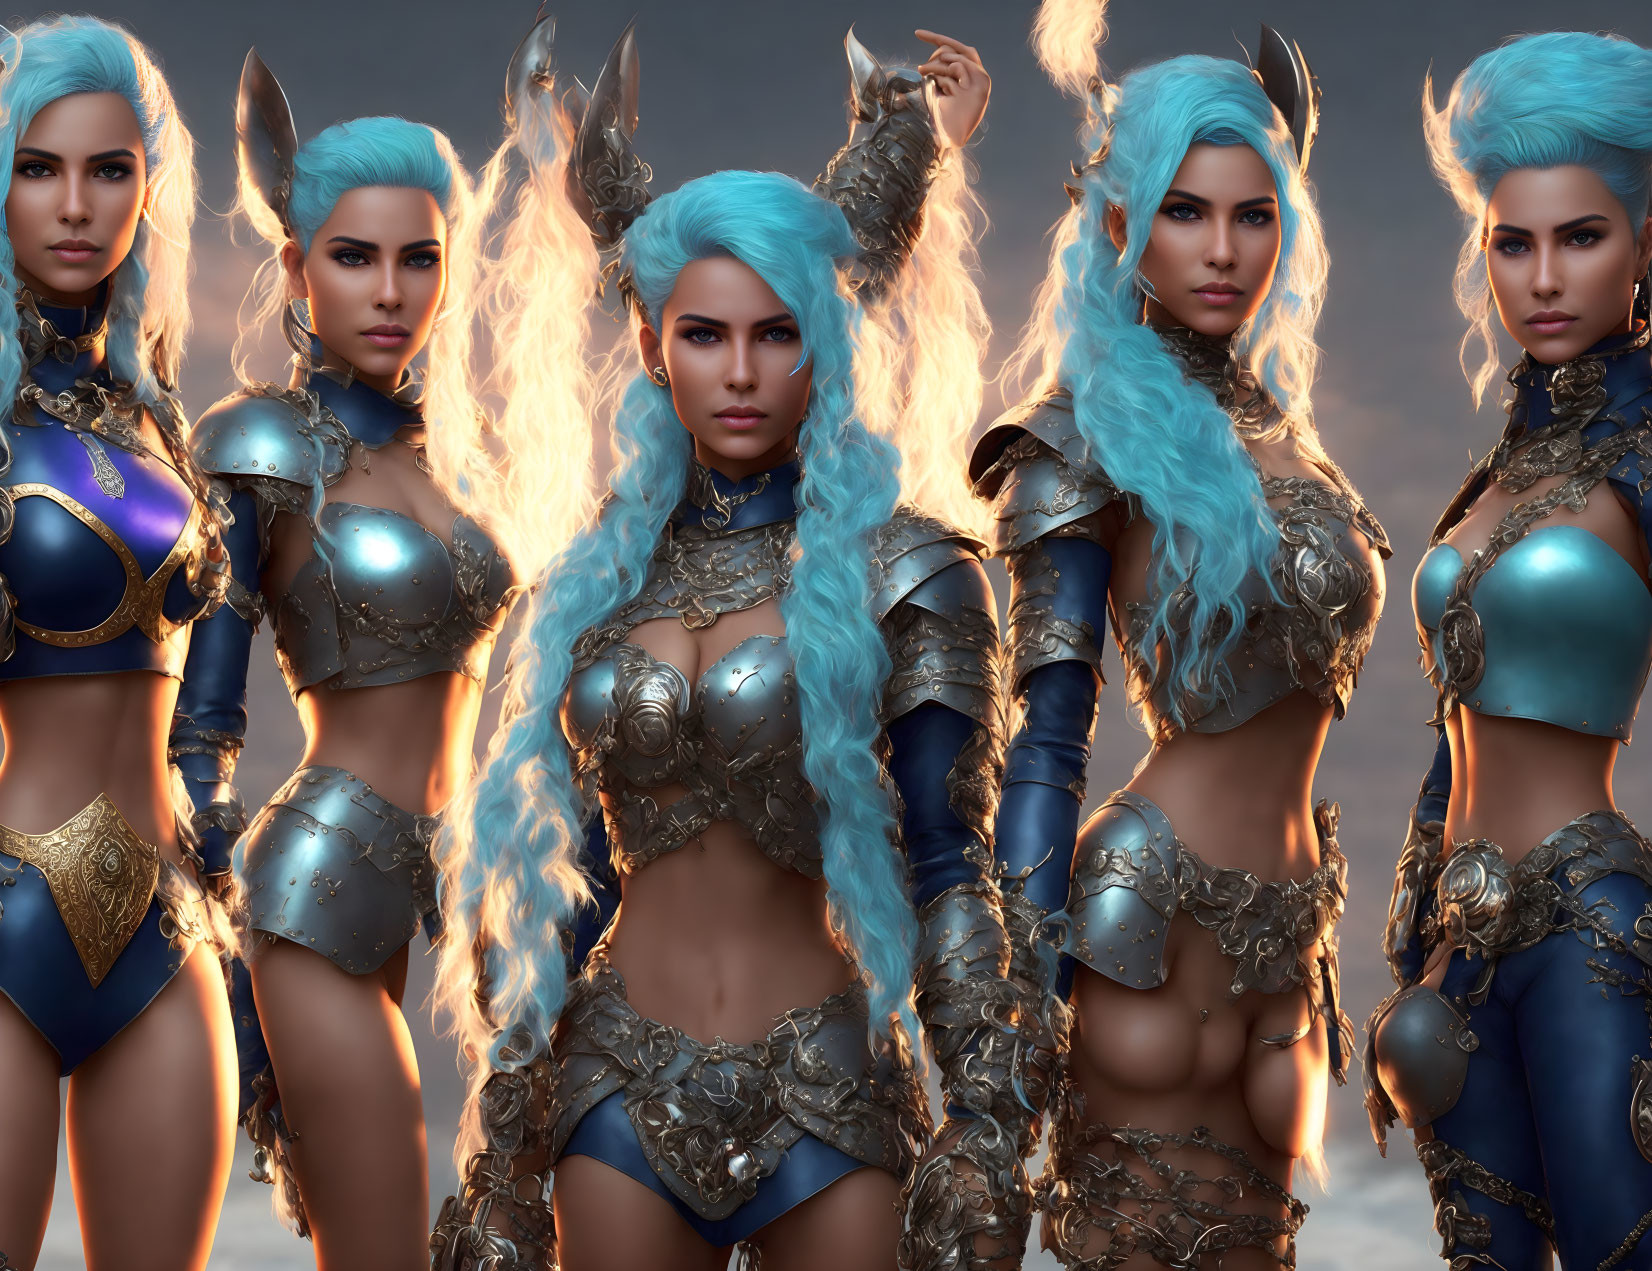 Five female warriors in ornate armor with blue hair on a cloudy backdrop